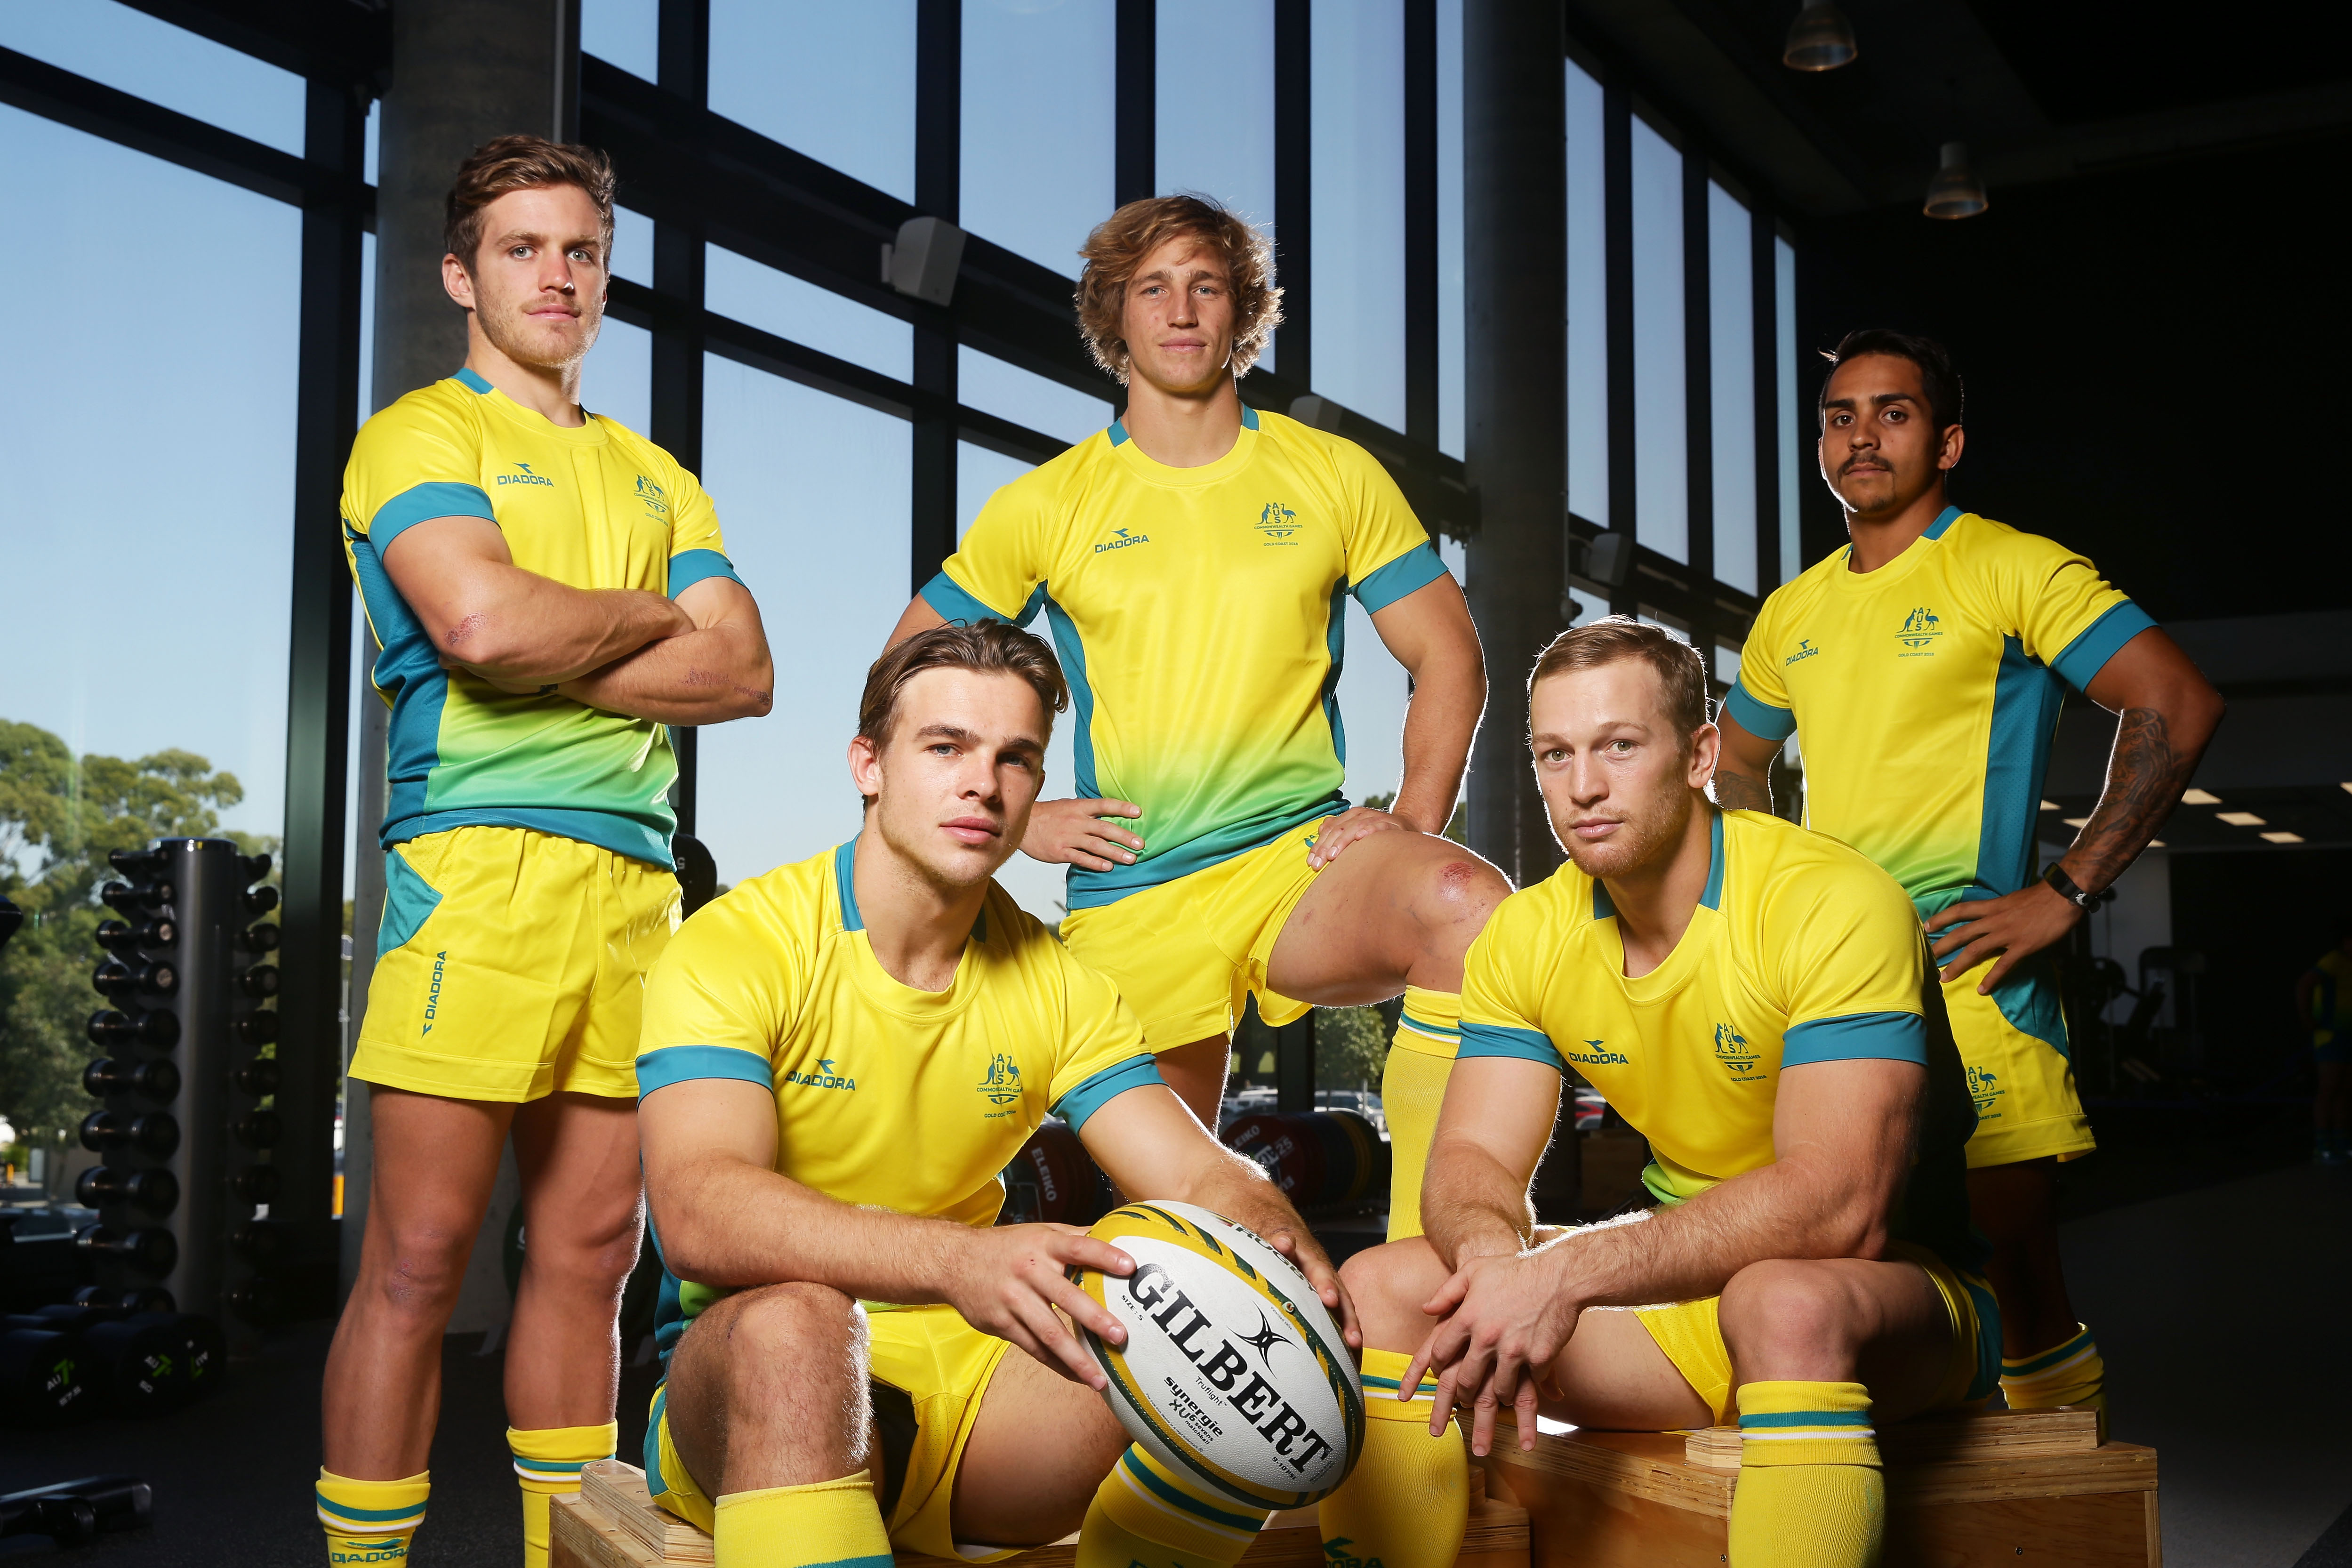 MEN’S RUGBY SEVENS PREVIEW ROLLERCOASTER RIDE Commonwealth Games